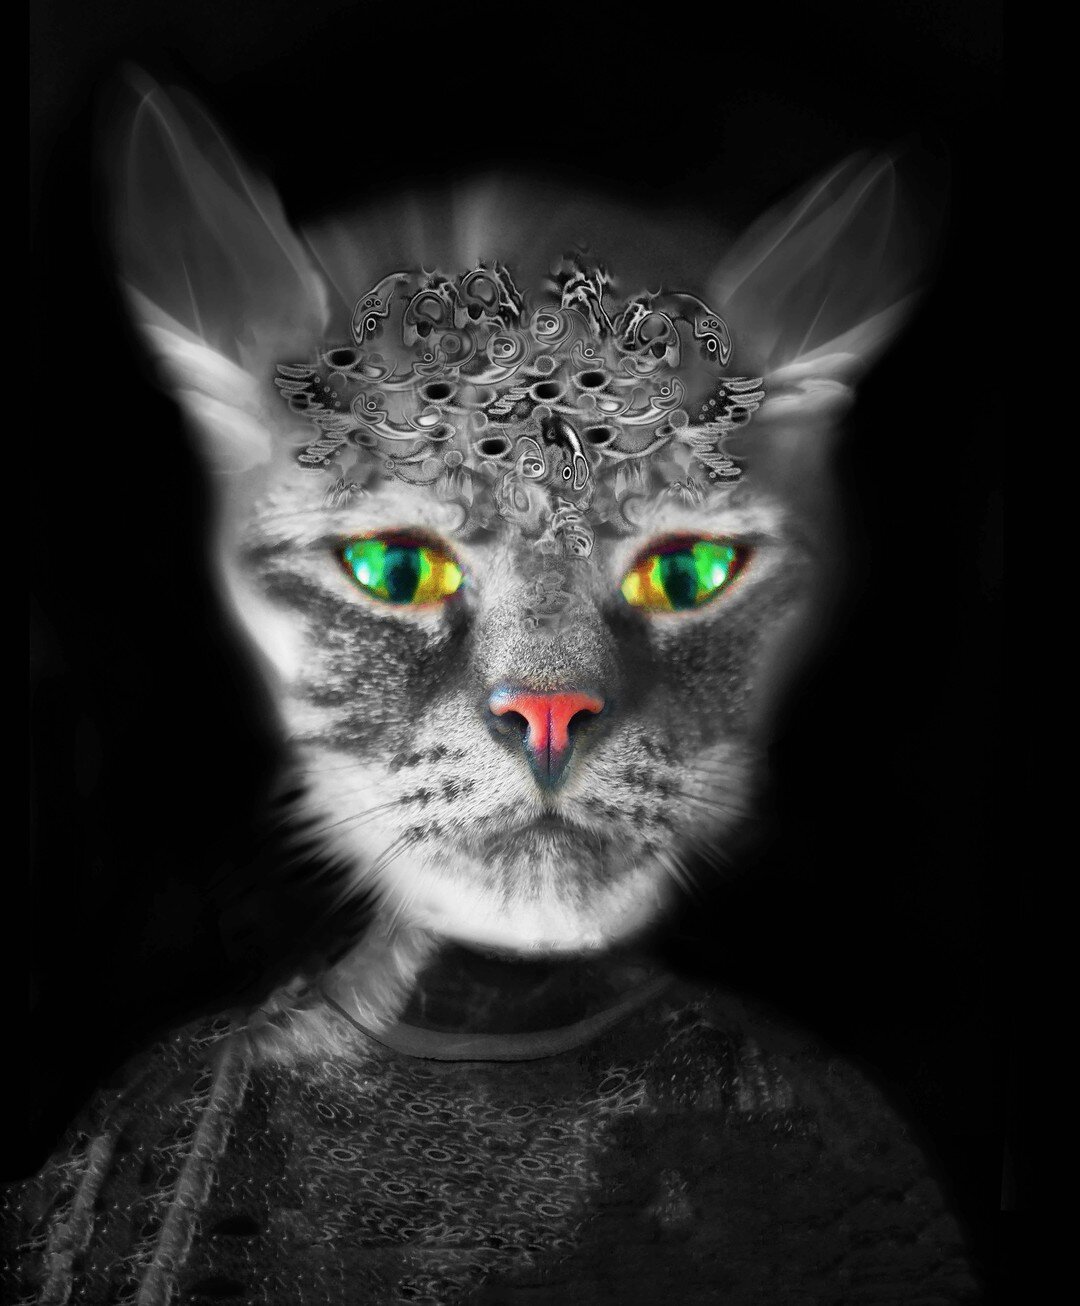 A Cat's Mind, Daguerre
(Cat # 12)
digital photograph
24 x 16 inches
or dimensions variable
&copy; Gary Justis 2020

@springboard_arts
@jerrysaltz
@arcadeproject_curatorial